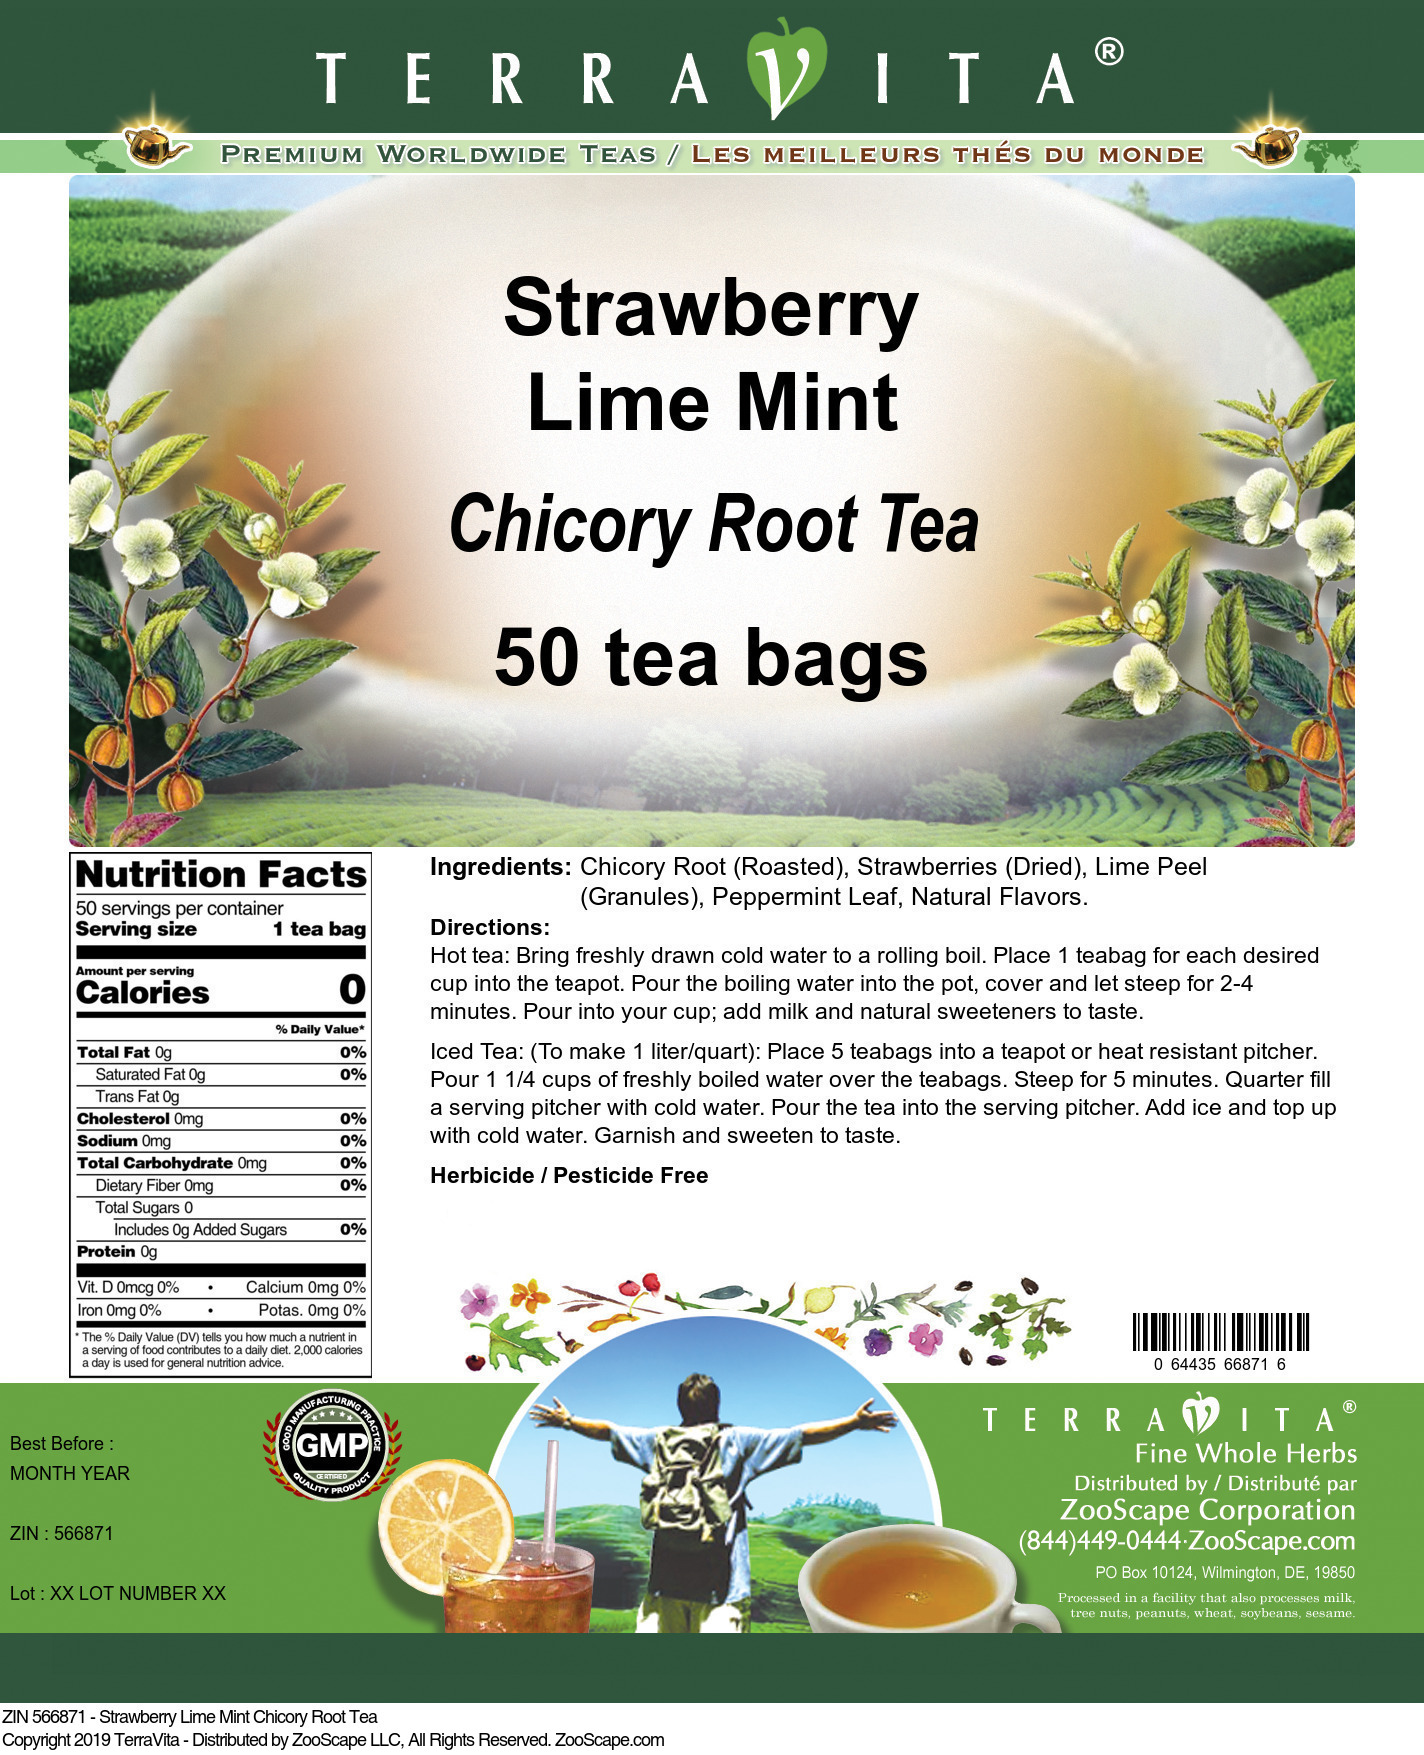 Strawberry Lime Mint Chicory Root Tea - Label